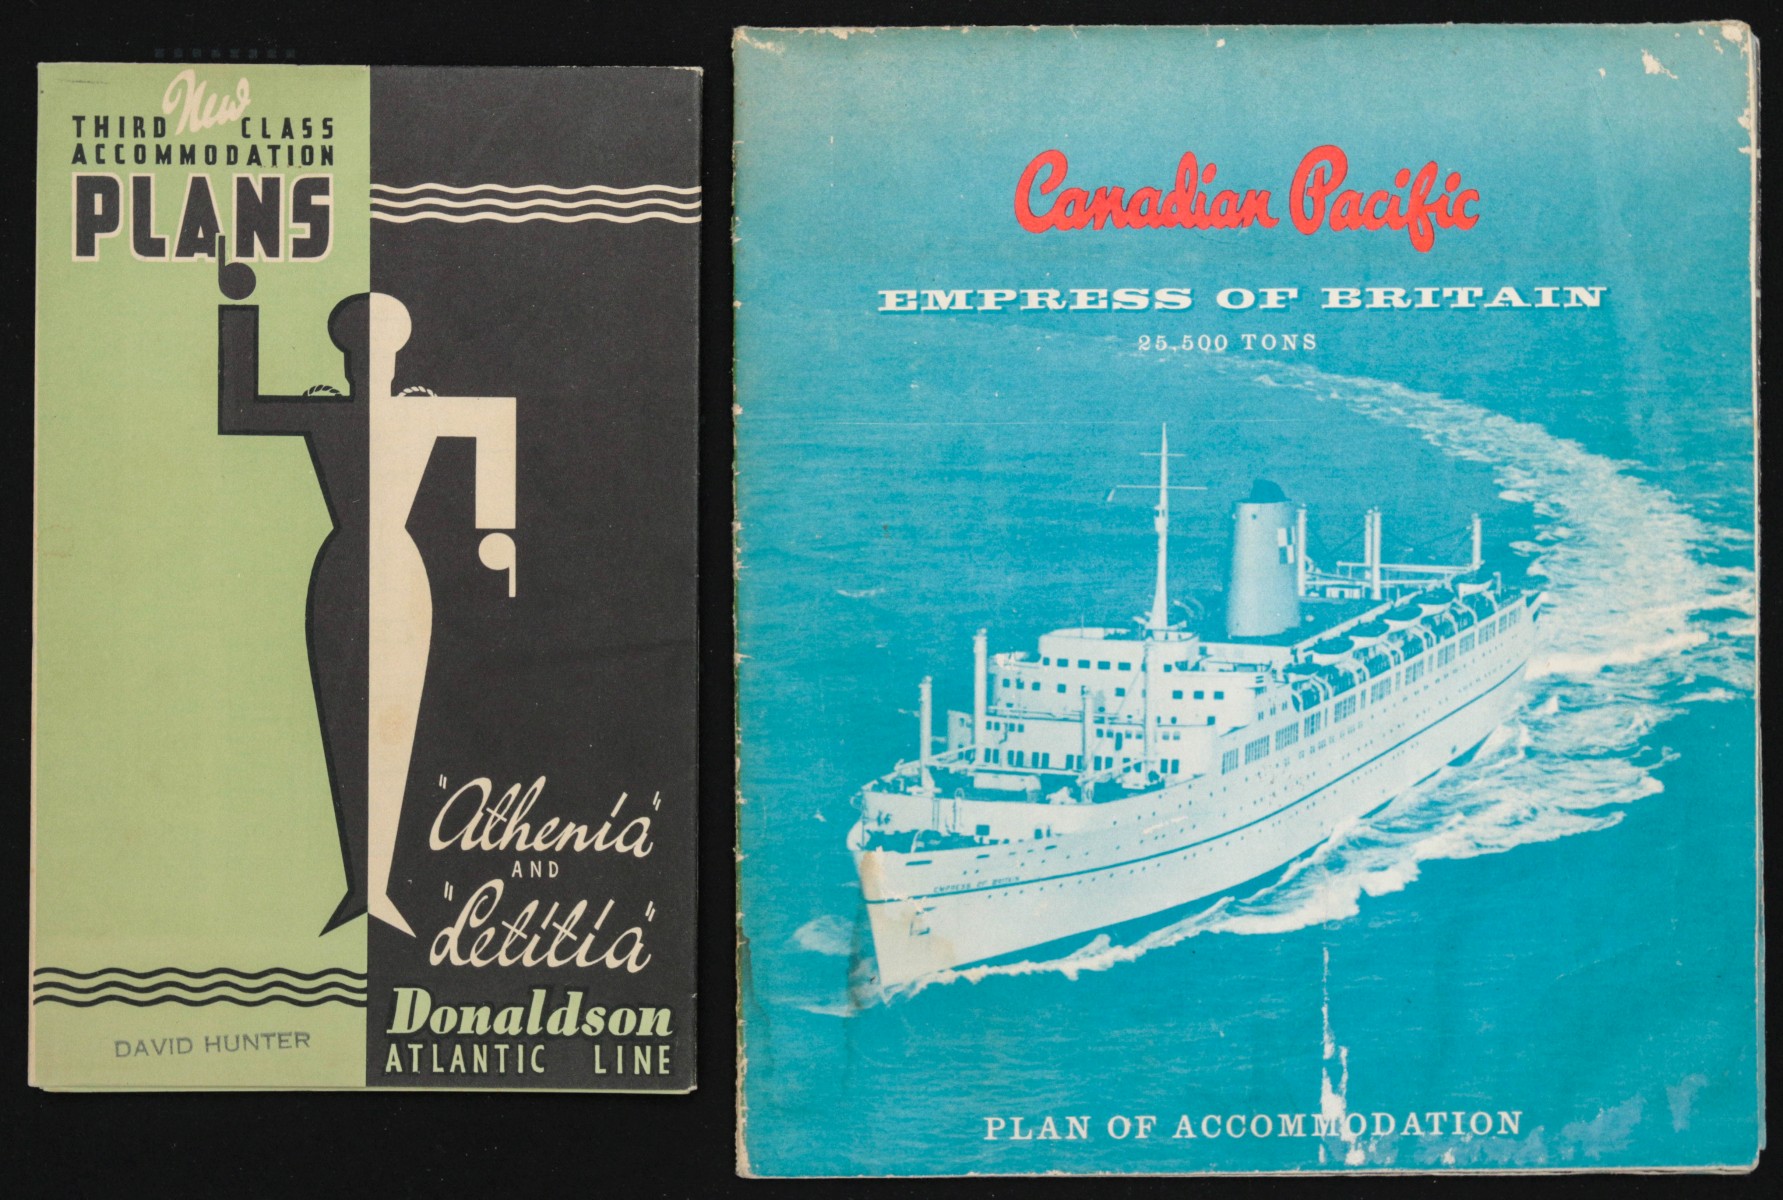 A COLLECTION OF STEAMSHIP TRAVEL BROCHURES